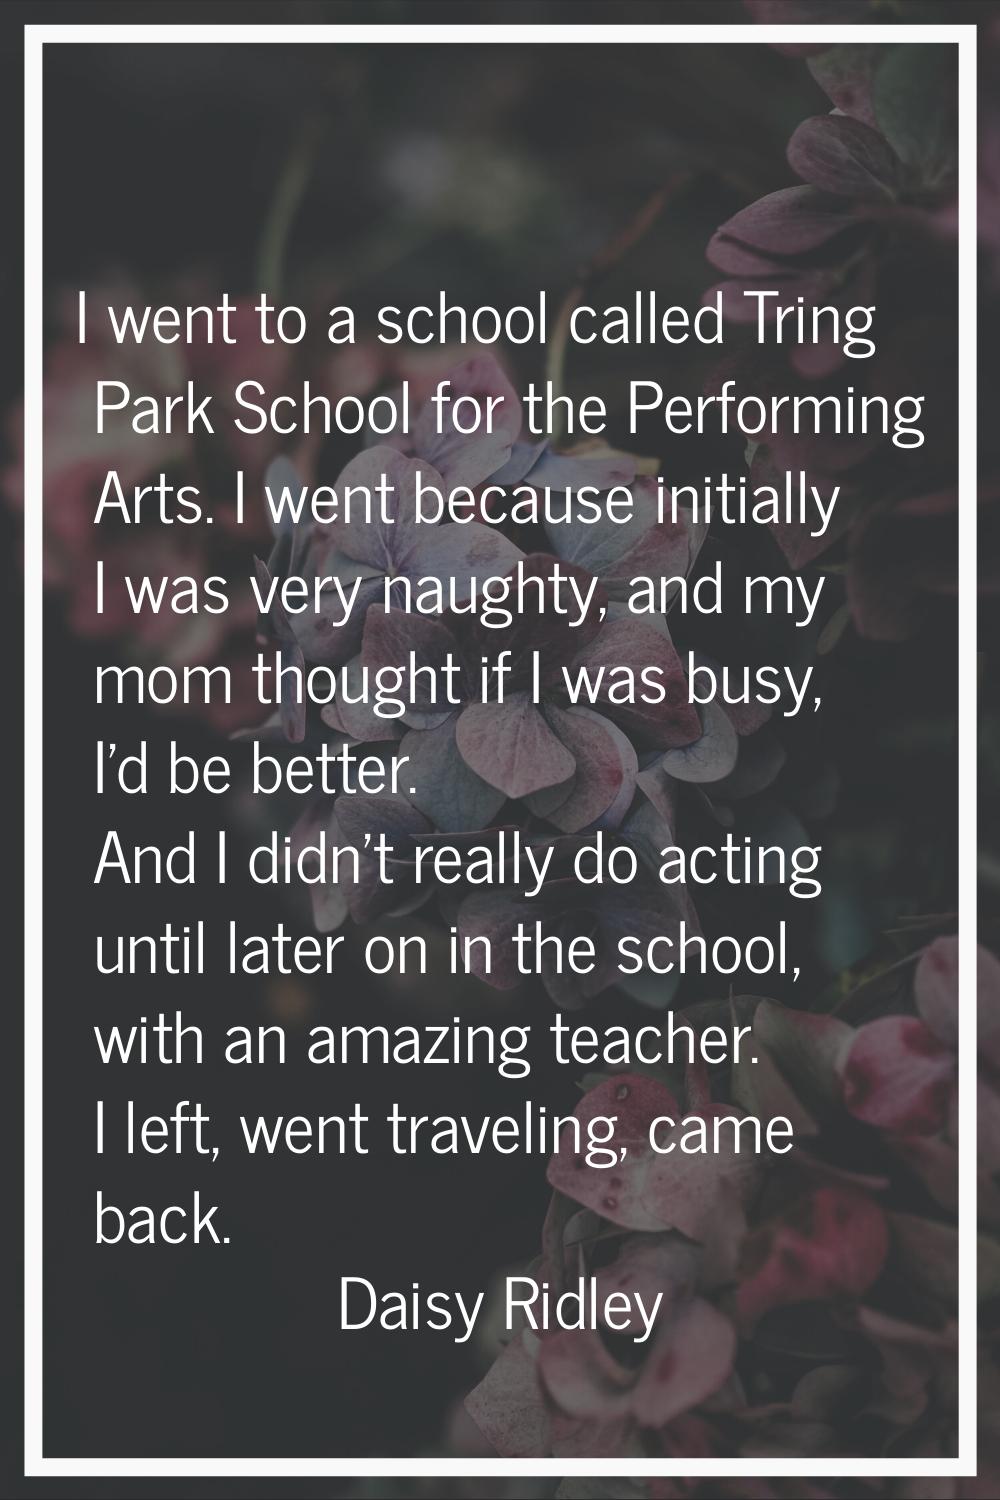 I went to a school called Tring Park School for the Performing Arts. I went because initially I was